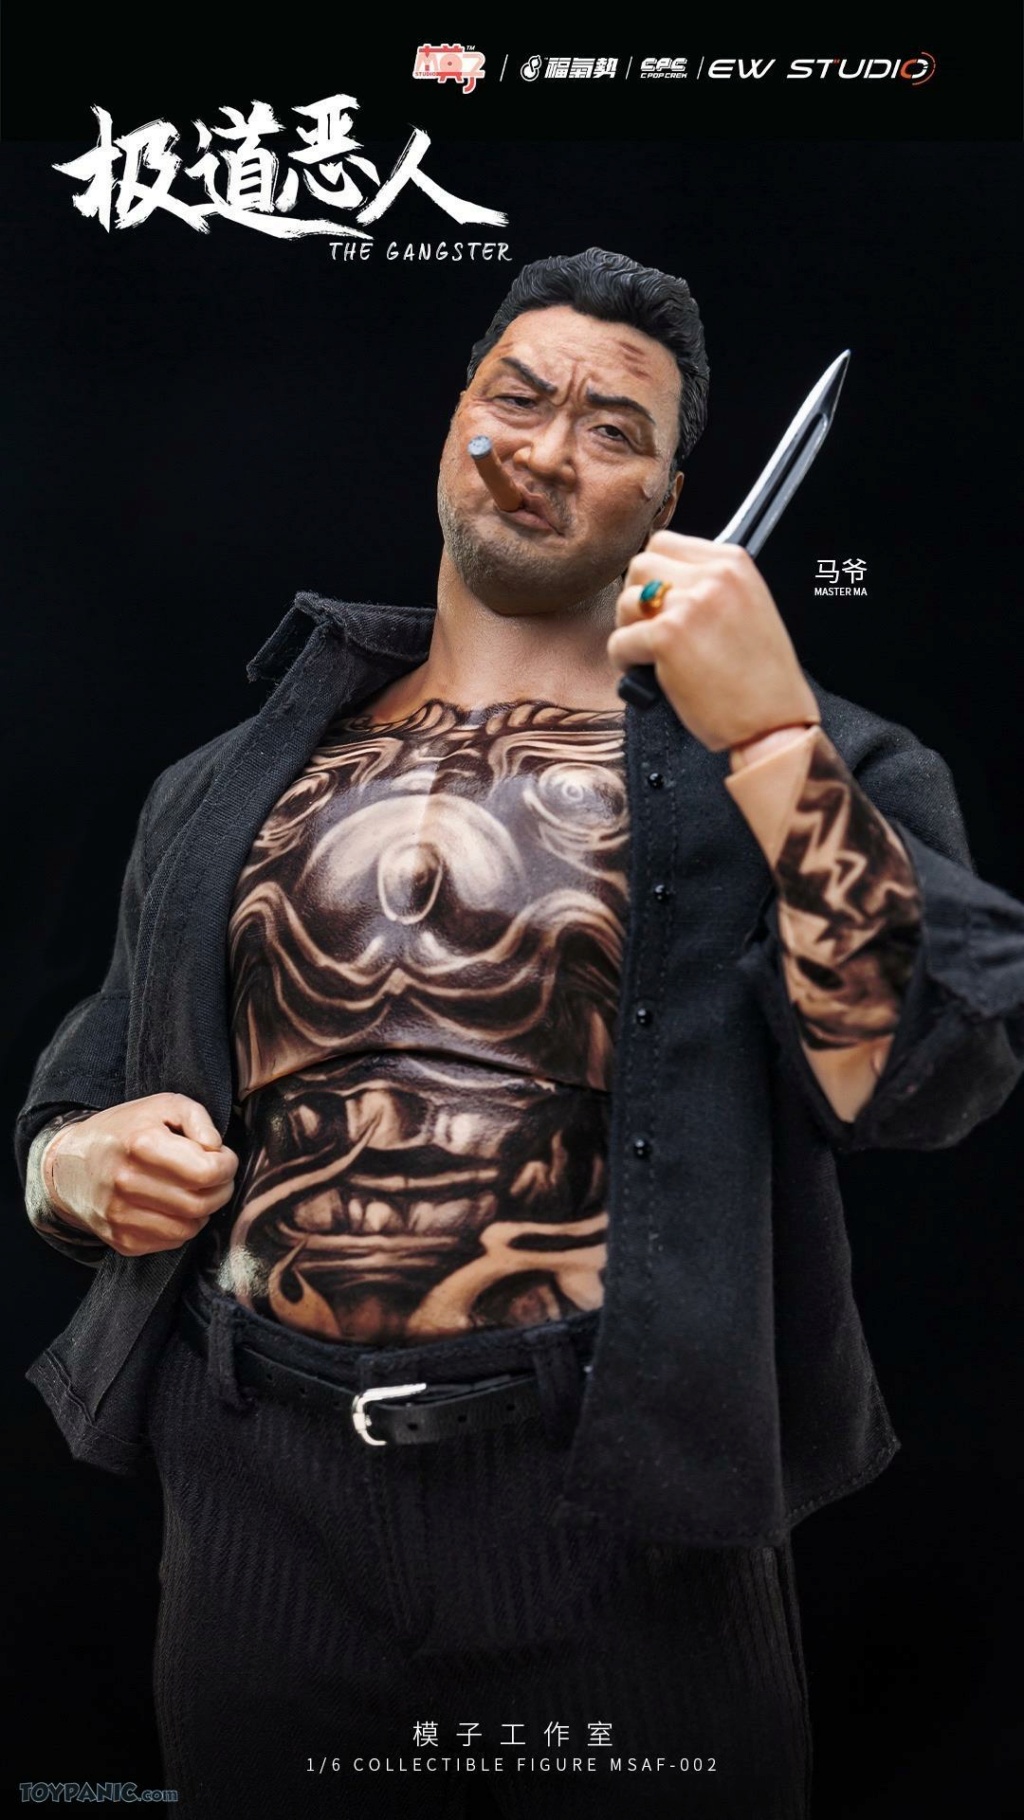 Asian - NEW PRODUCT: Moz Studio: 1/6 The Gangster Master Ma (MSAF002) 25620217